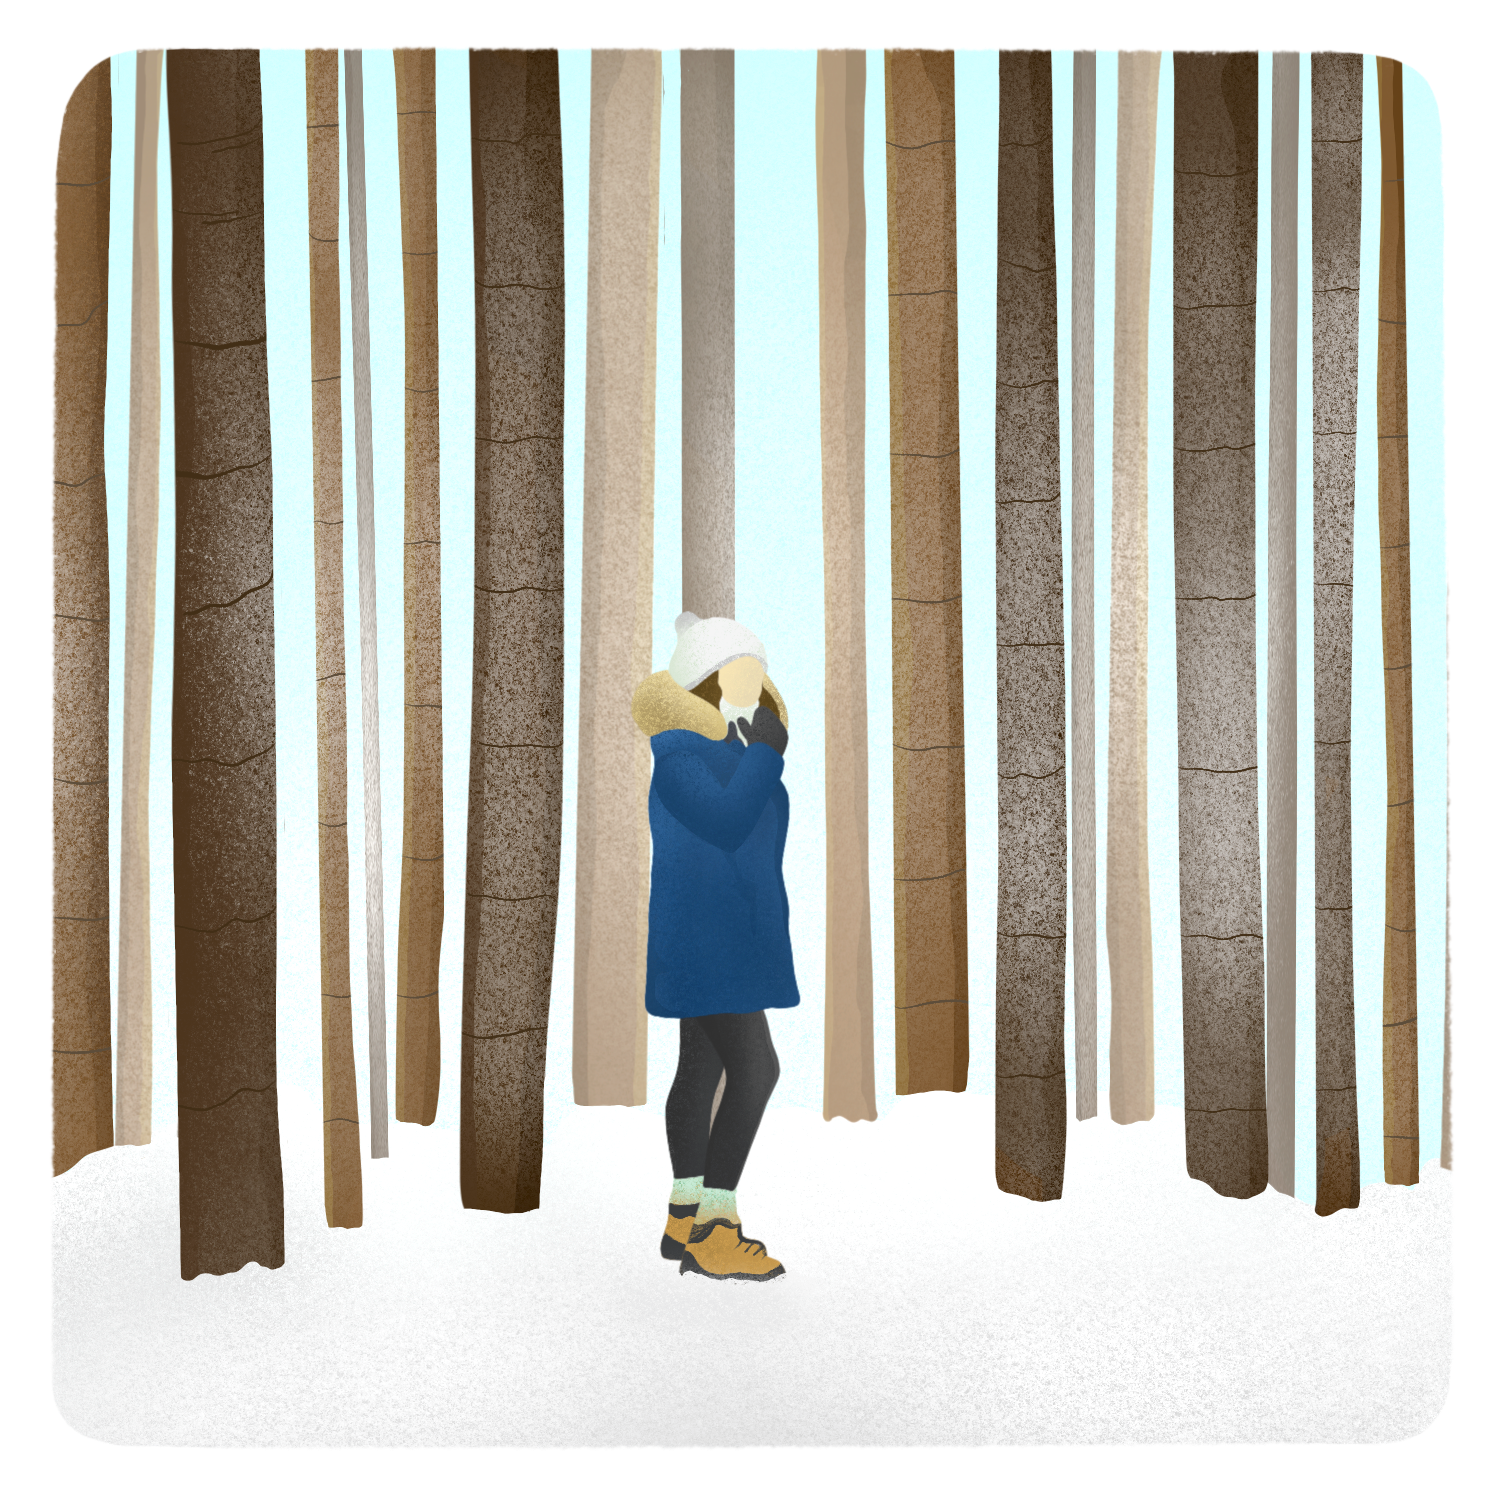 Nature Therapy Illustration - Woman in Winter Woods